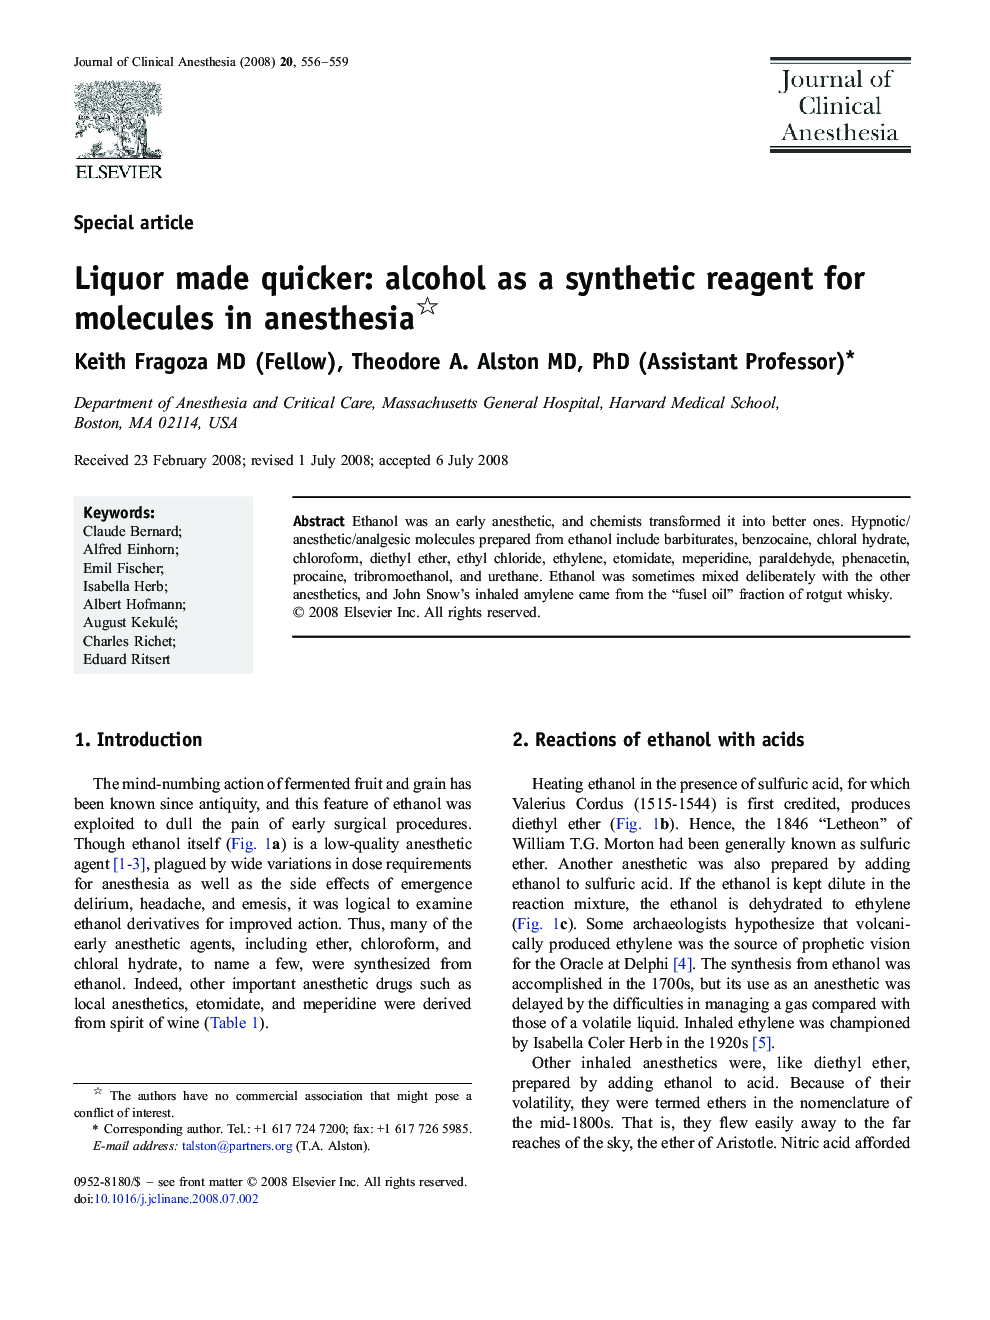 Liquor made quicker: alcohol as a synthetic reagent for molecules in anesthesia 